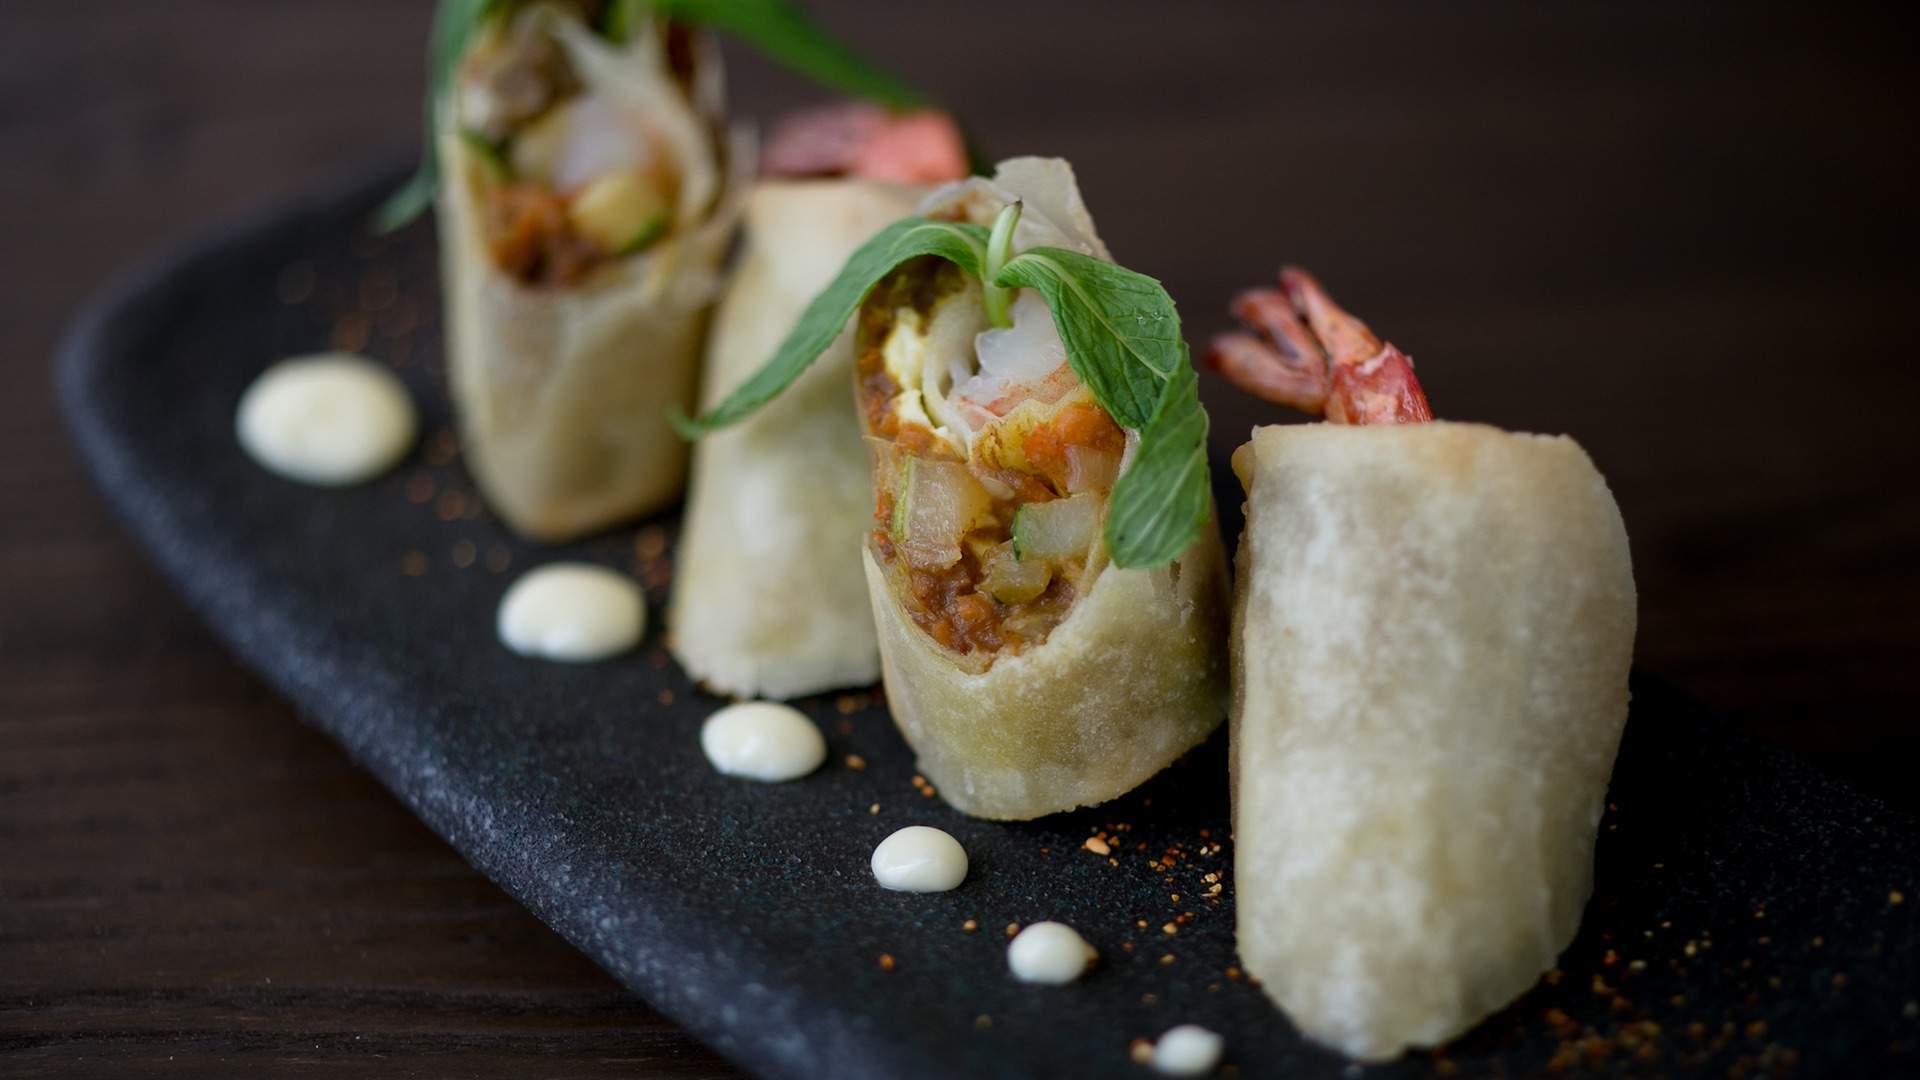 The Modern Eatery Is Melbourne's New Restaurant Dedicated to Aburi Sushi